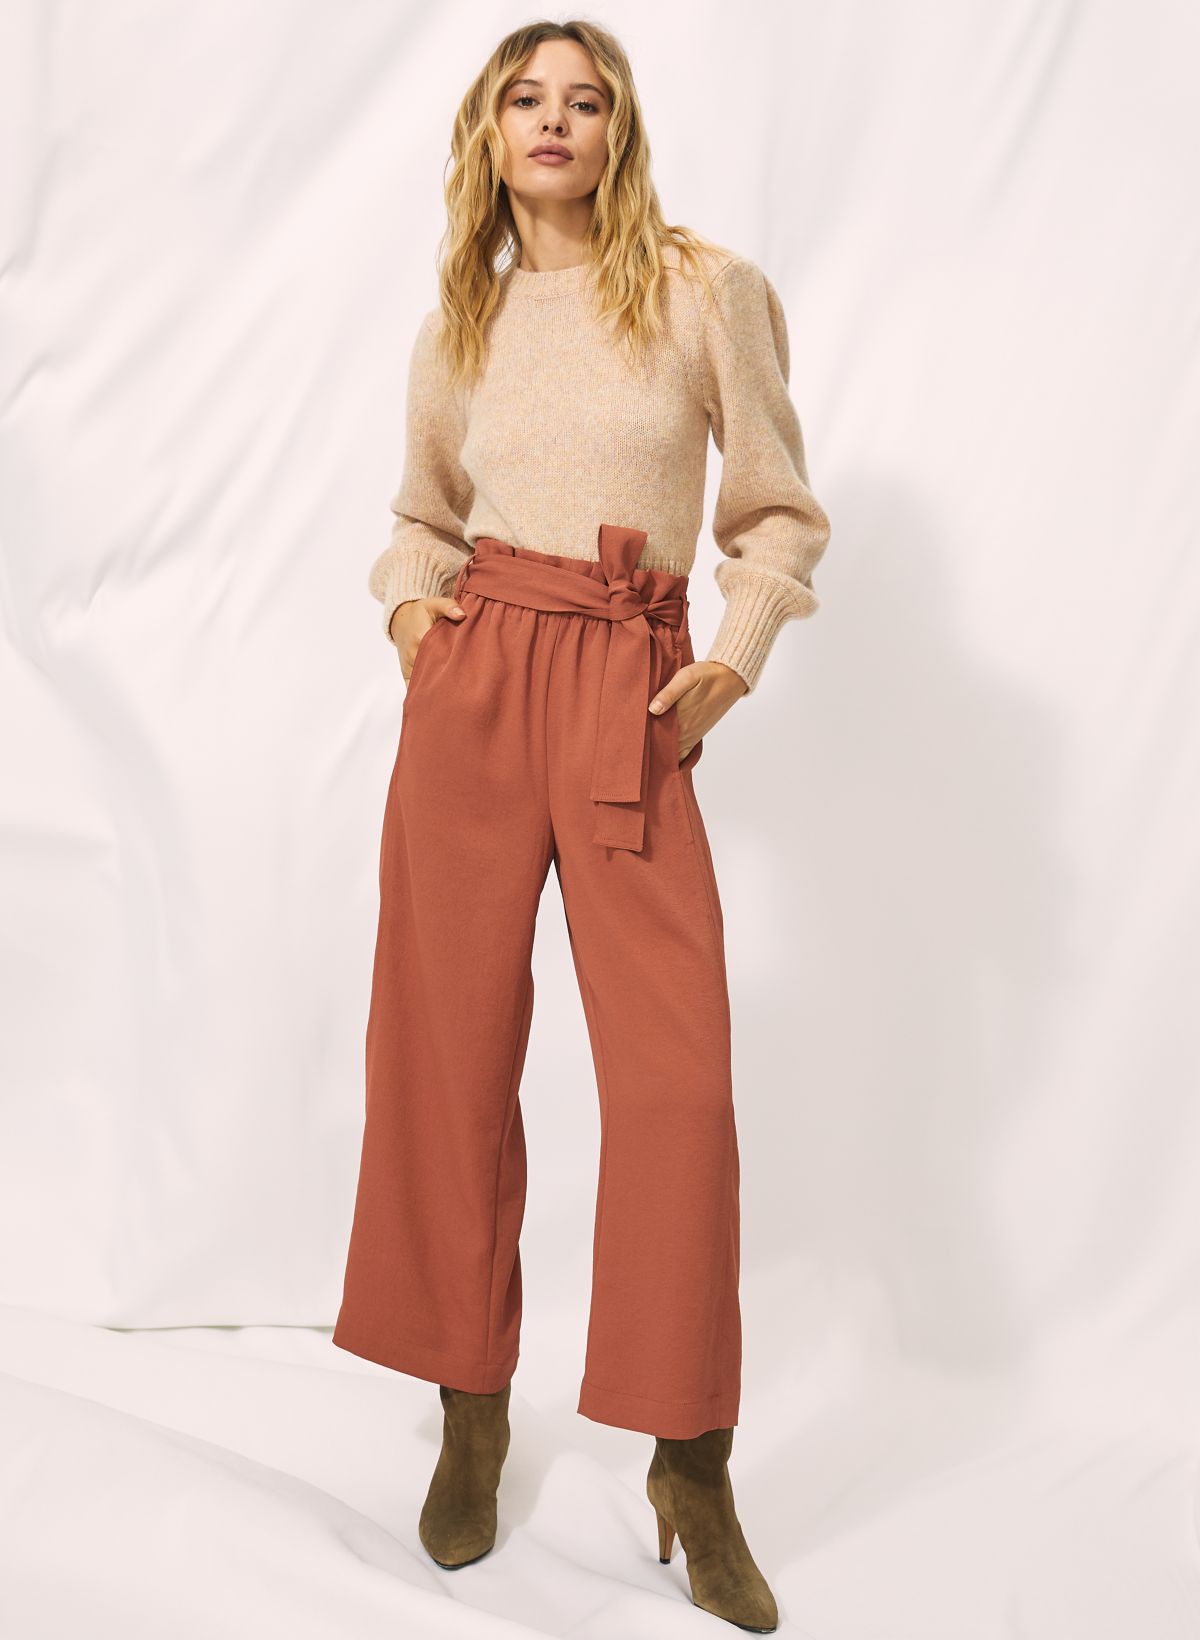 High-Waisted Belted Paper Bag Pants for Women Business Casual